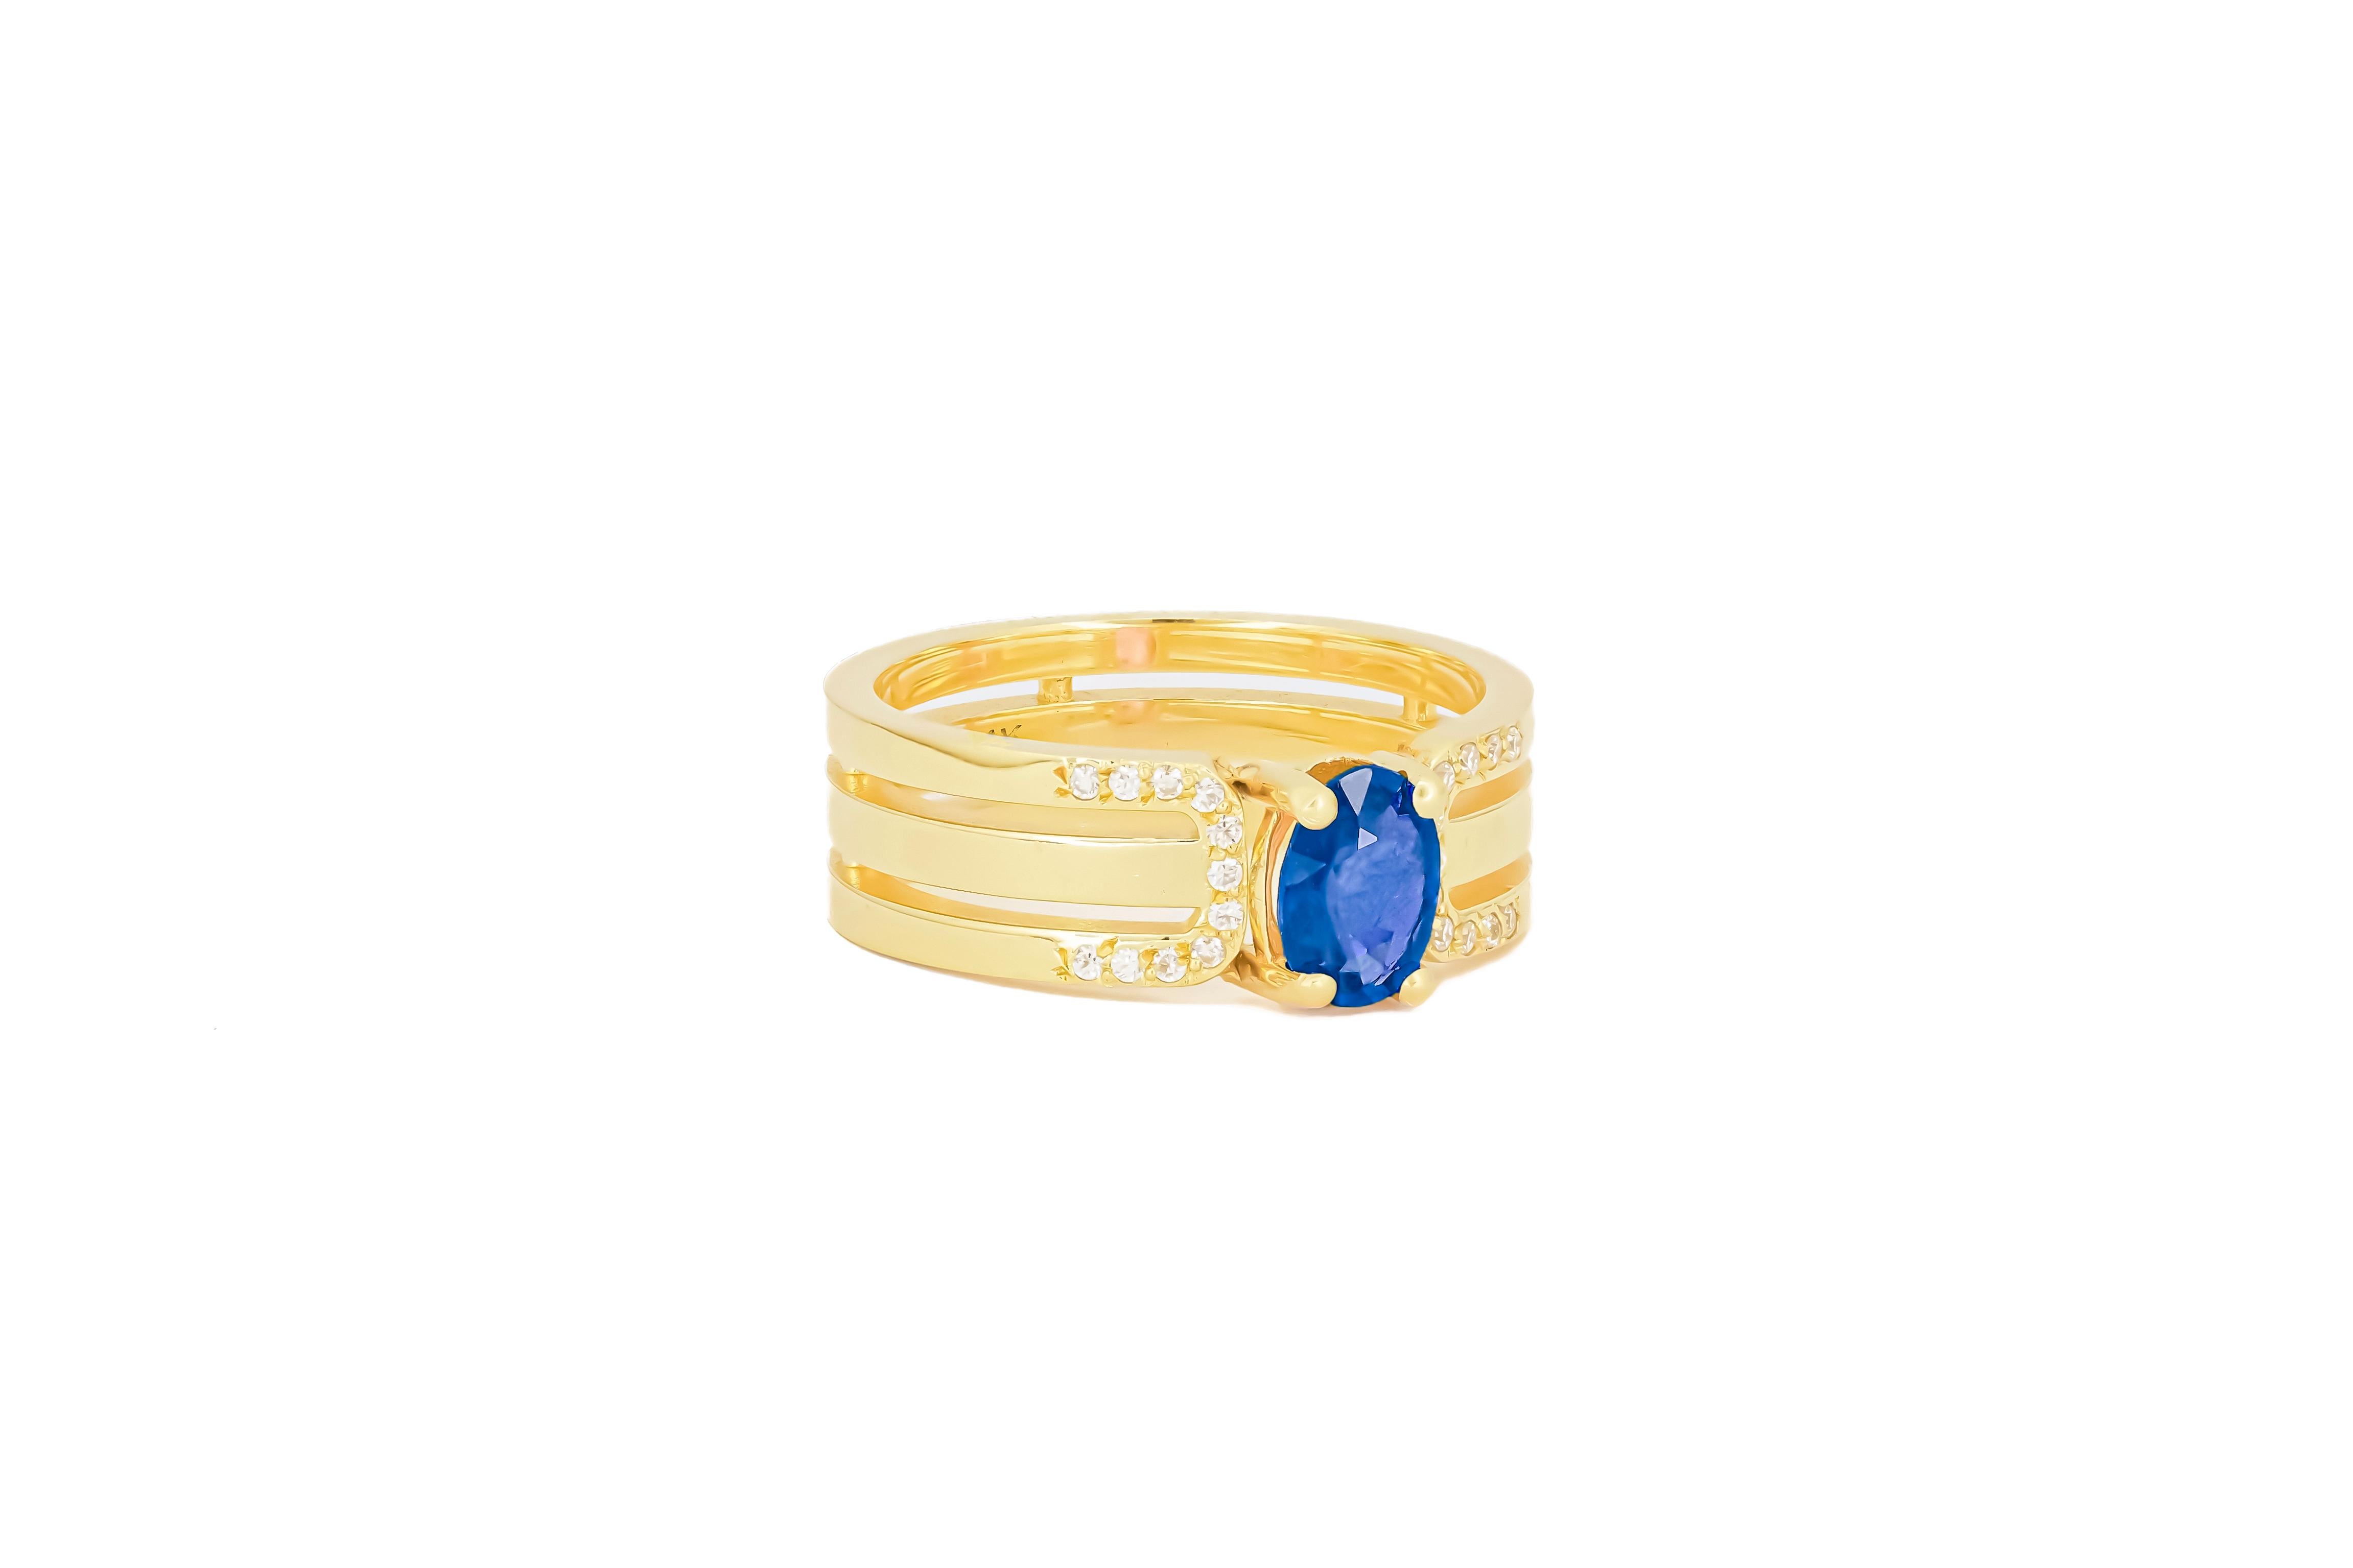 For Sale:  14 K Gold Mens Ring with Sapphire. 3